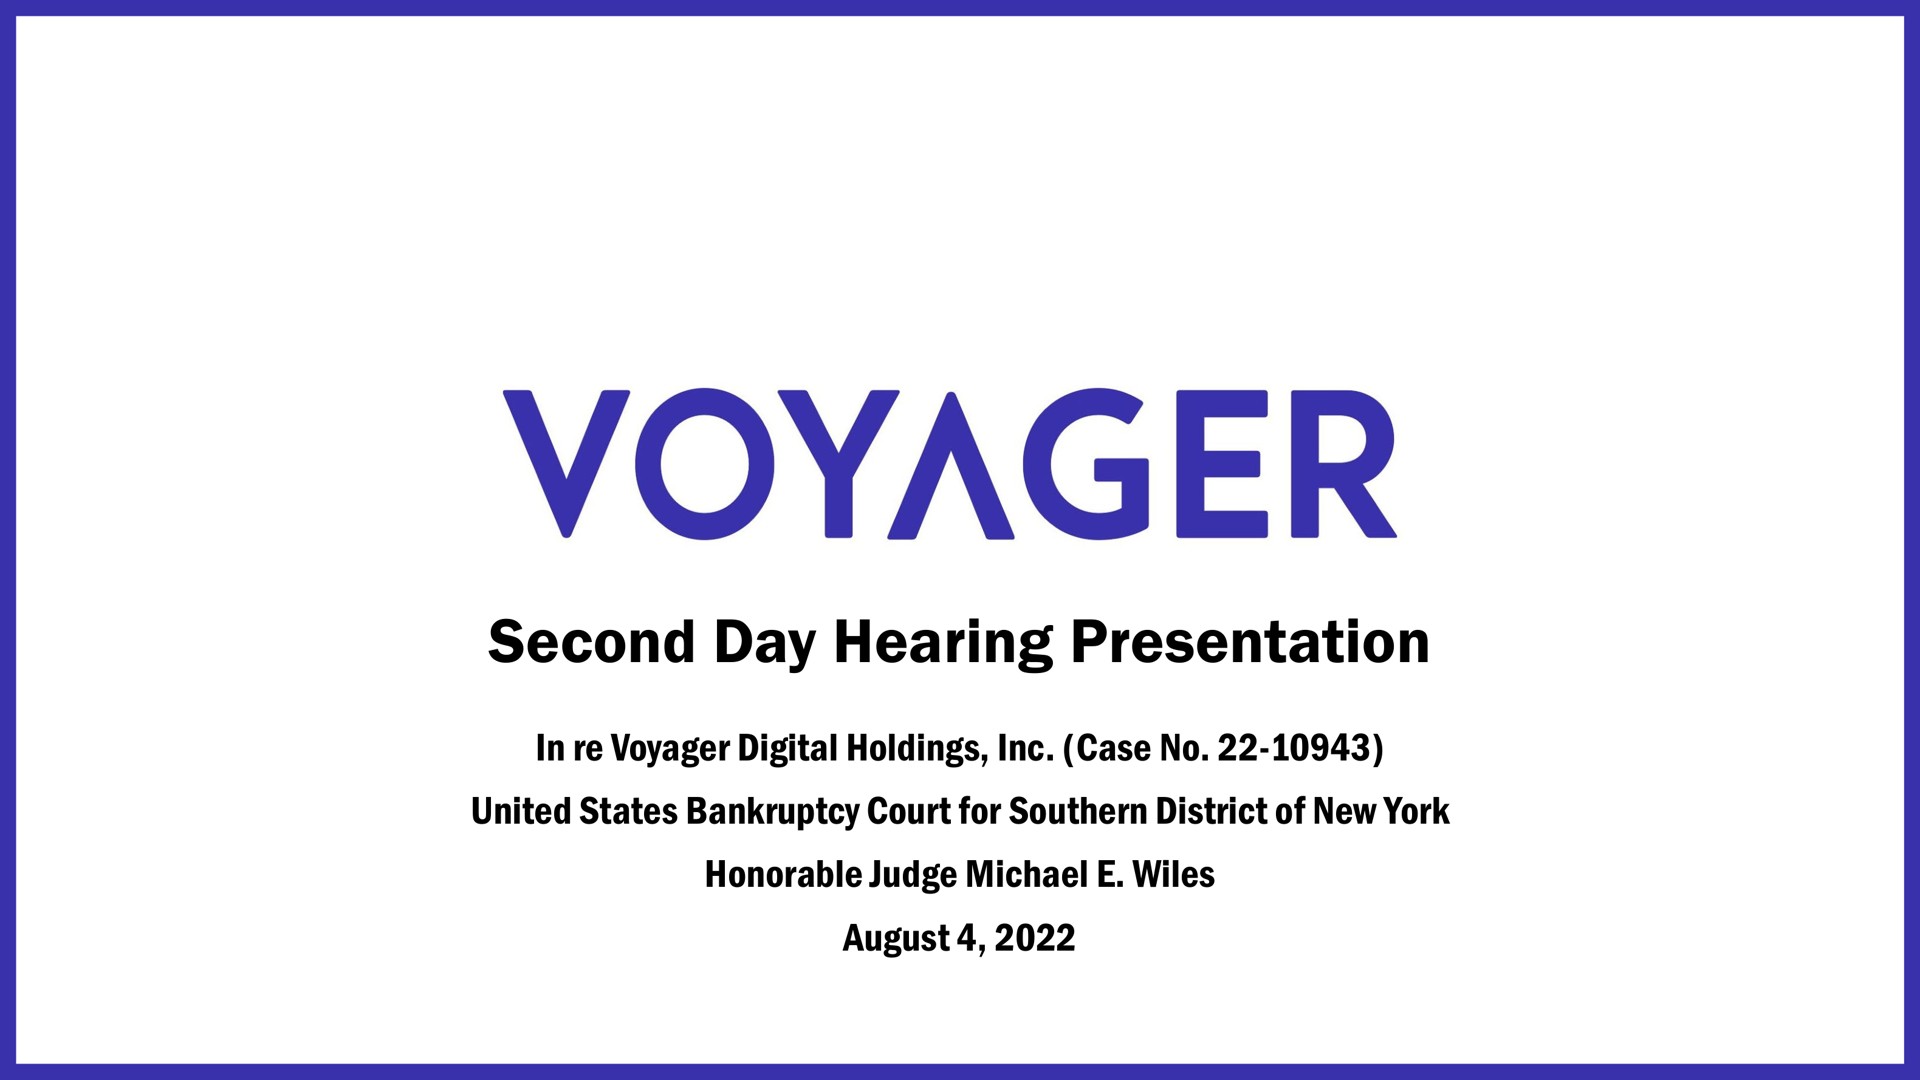 second day hearing presentation in voyager digital holdings case no united states bankruptcy court for southern district of new york honorable judge wiles august | Voyager Digital